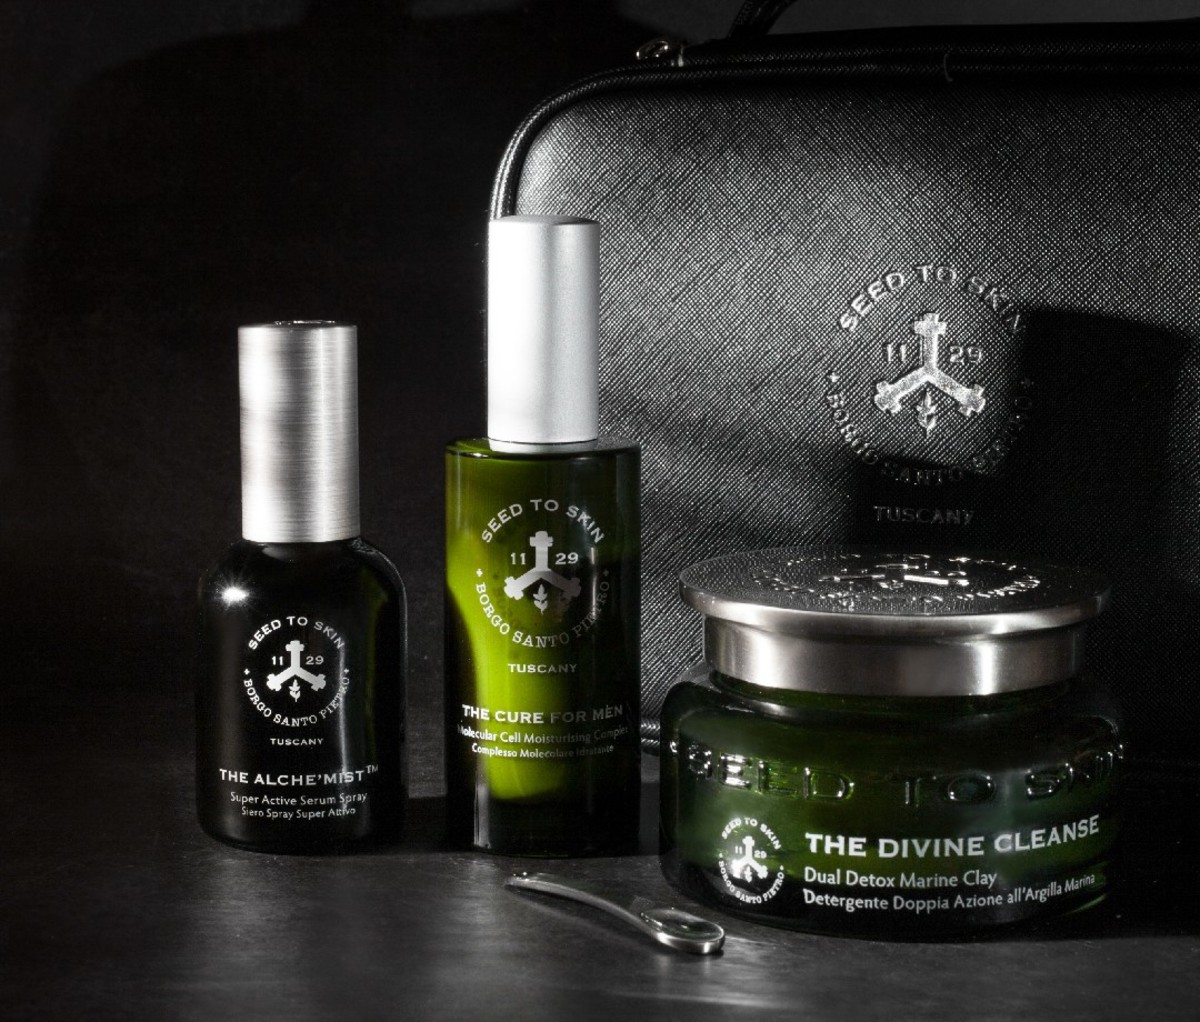 Green Bottles and Jars of Seed to Skin's Green Ritual Kit for Men